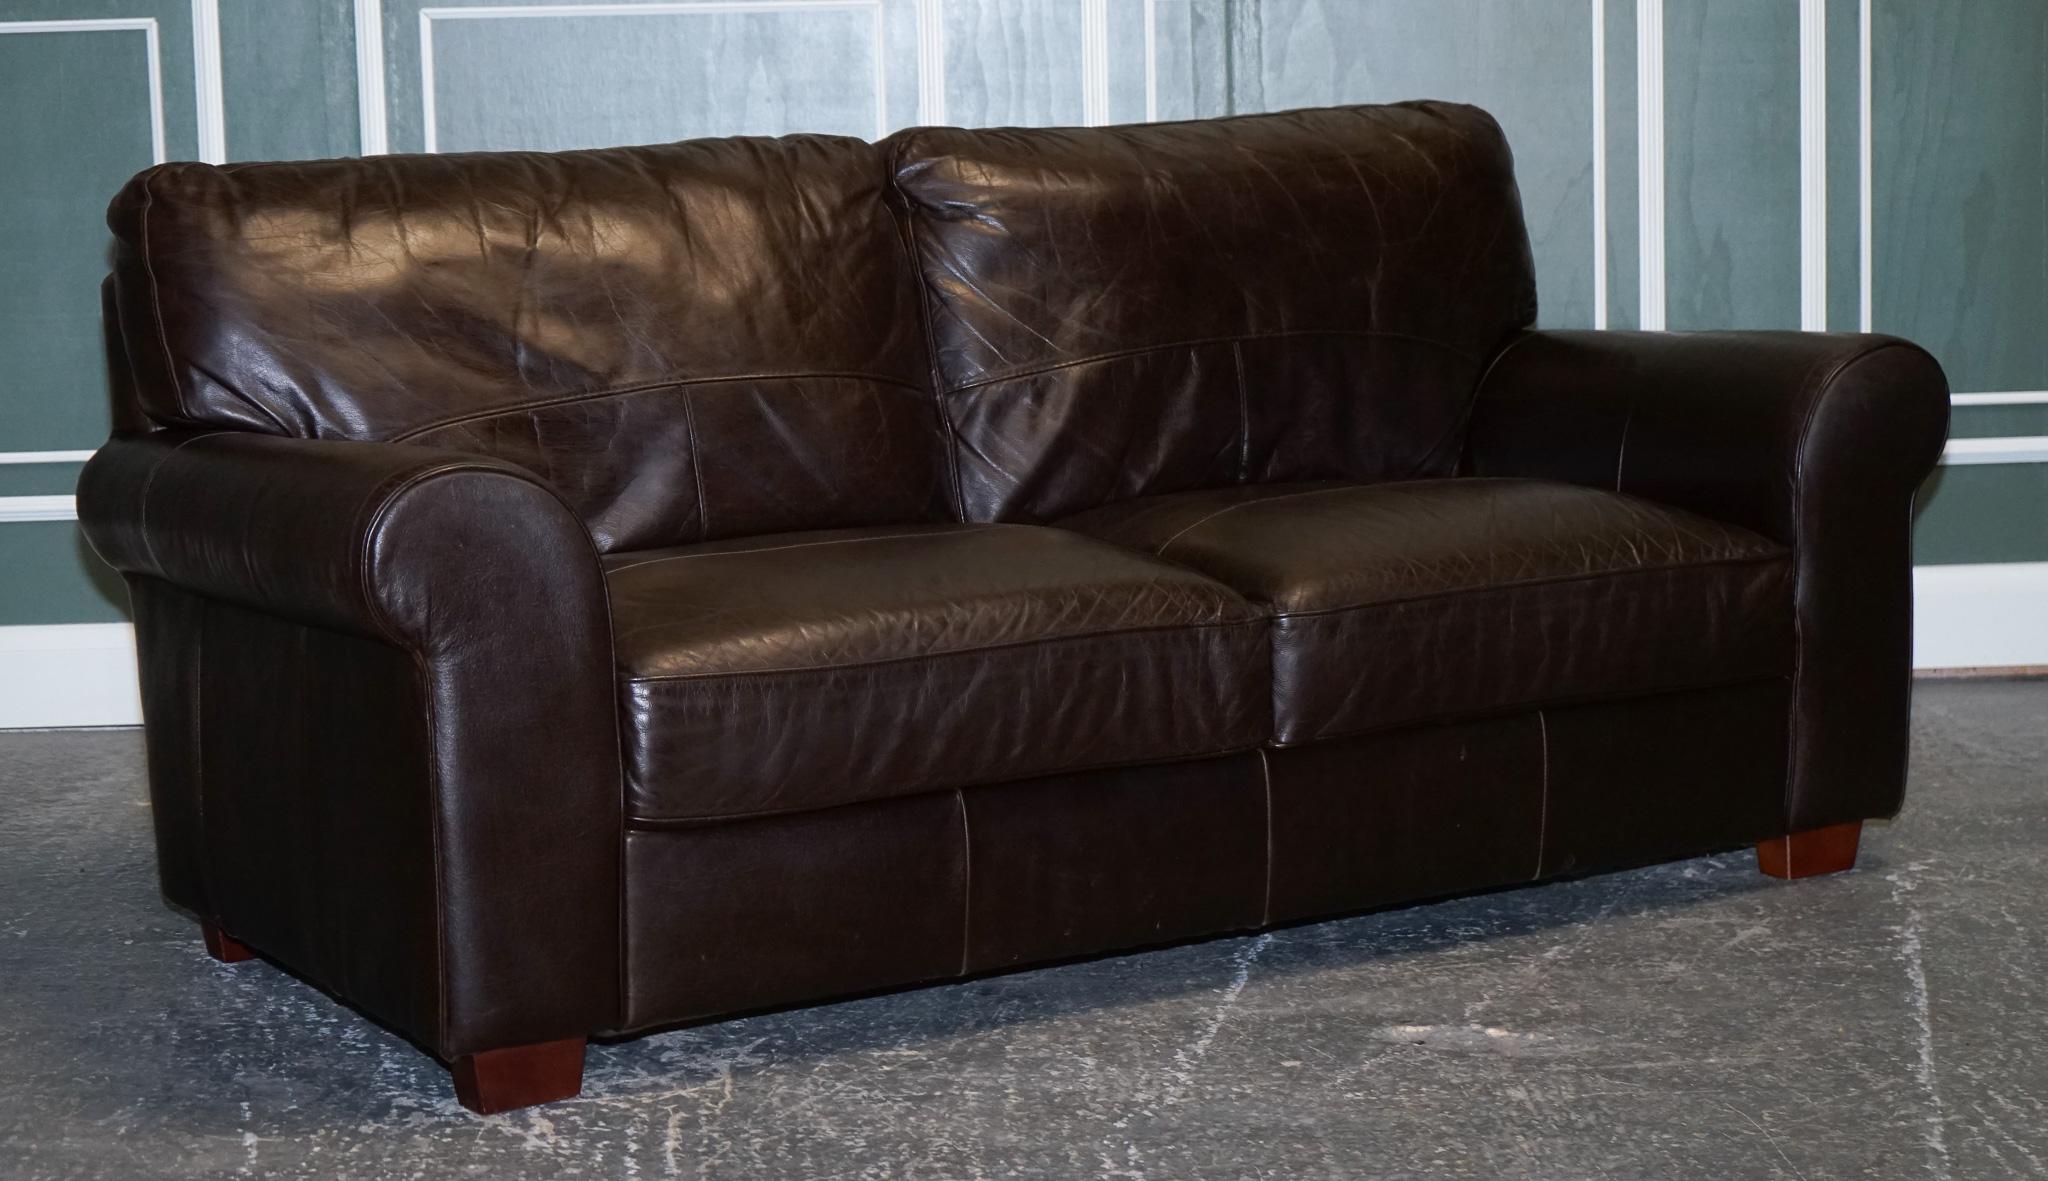 
We are delighted to Present This Vintage Chocolate Brown Leather Two To Three Seater Sofa.

Very good-looking sofa with all the cushions sewn into the sofa. 

We have deep cleaned the sofa throughout, hand waxed and hand polished the